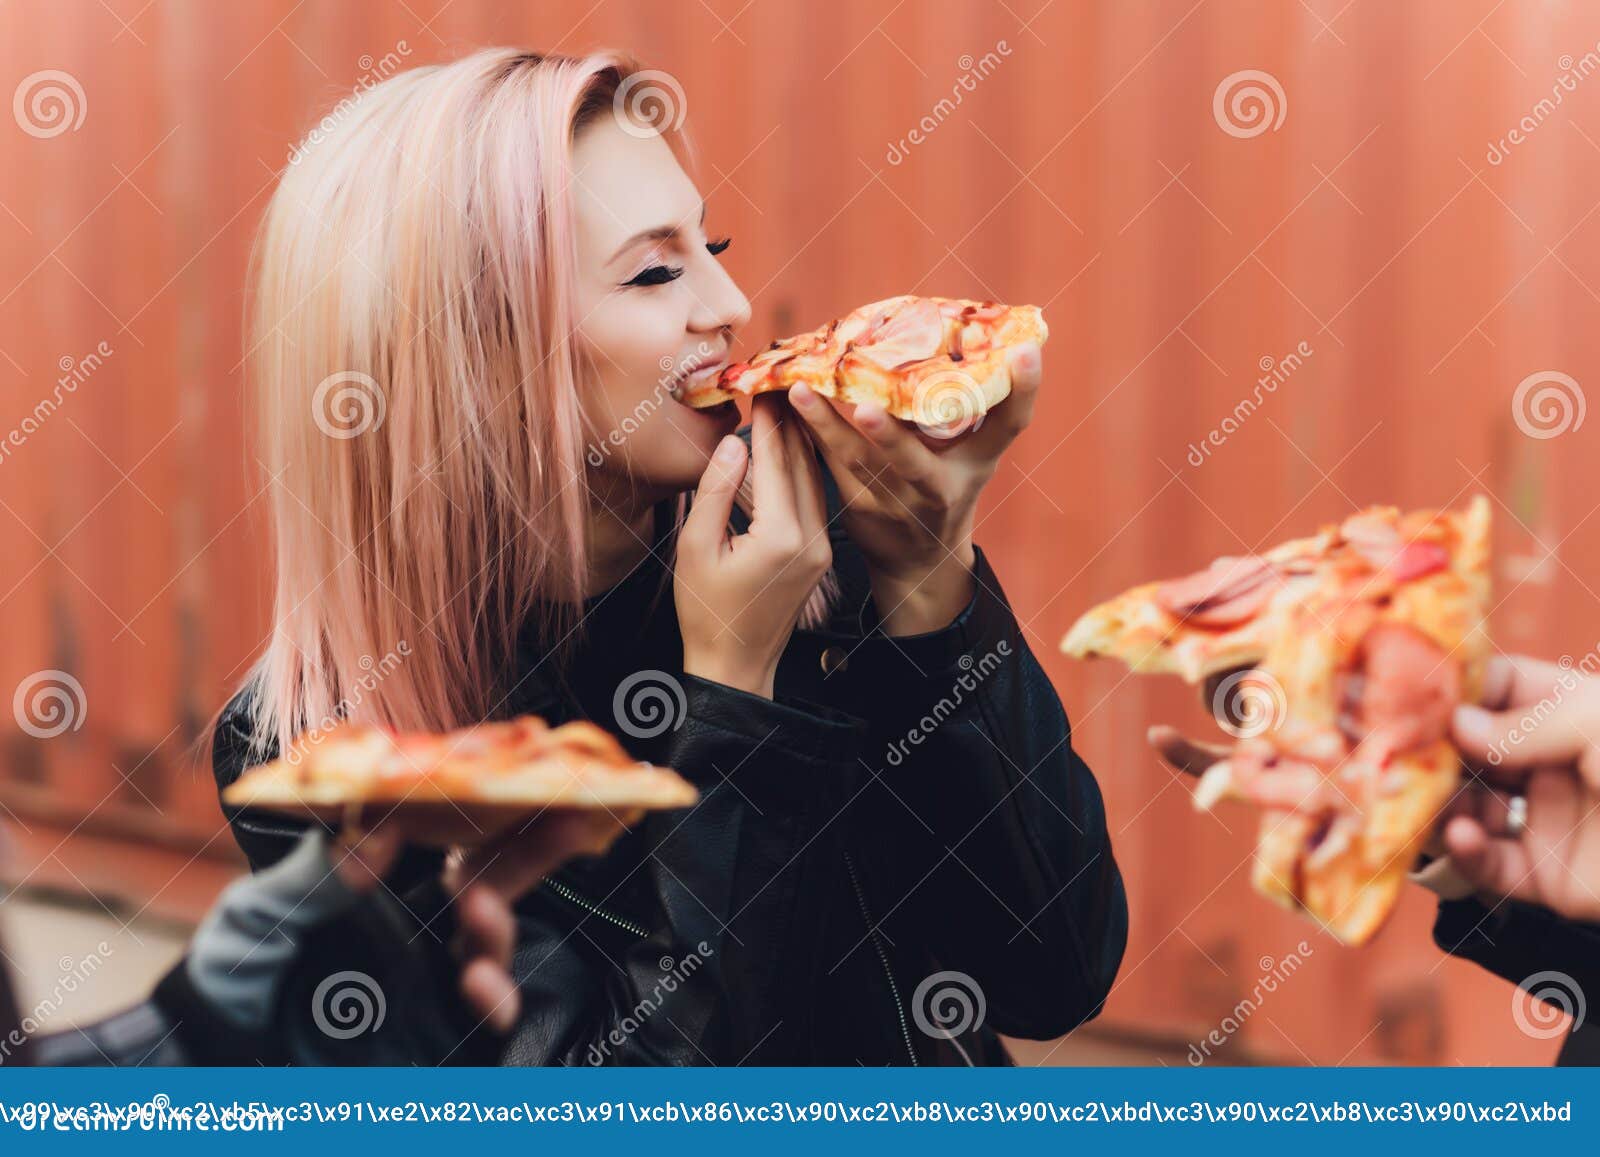 Girl Eating A Delicious Pizza While Sitting On A Motorcycle Stock